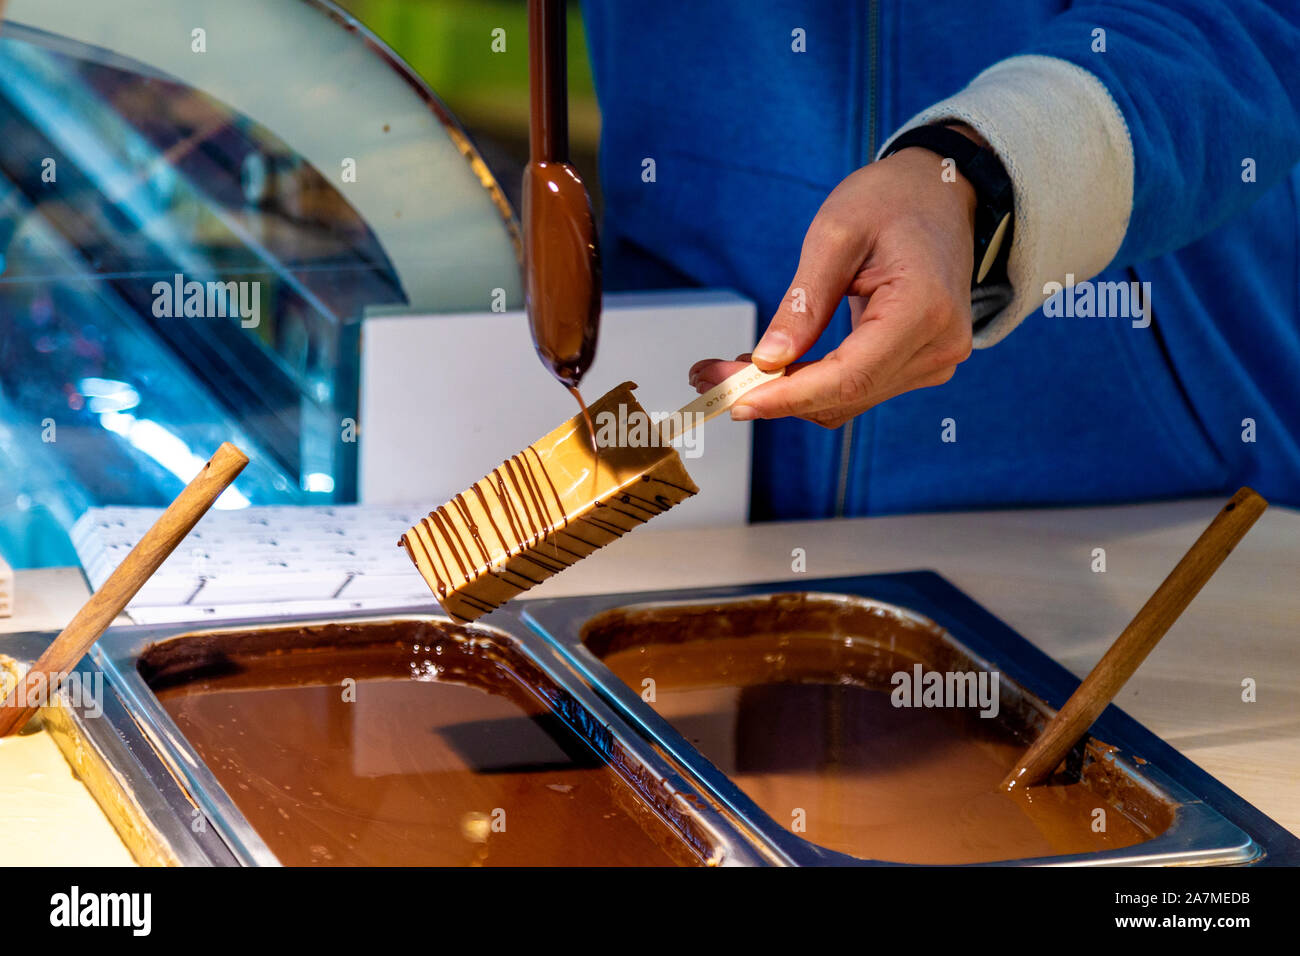 Ice lolly being dipped in chocolate at Loco Polo, San Sebastian, Spain Stock Photo